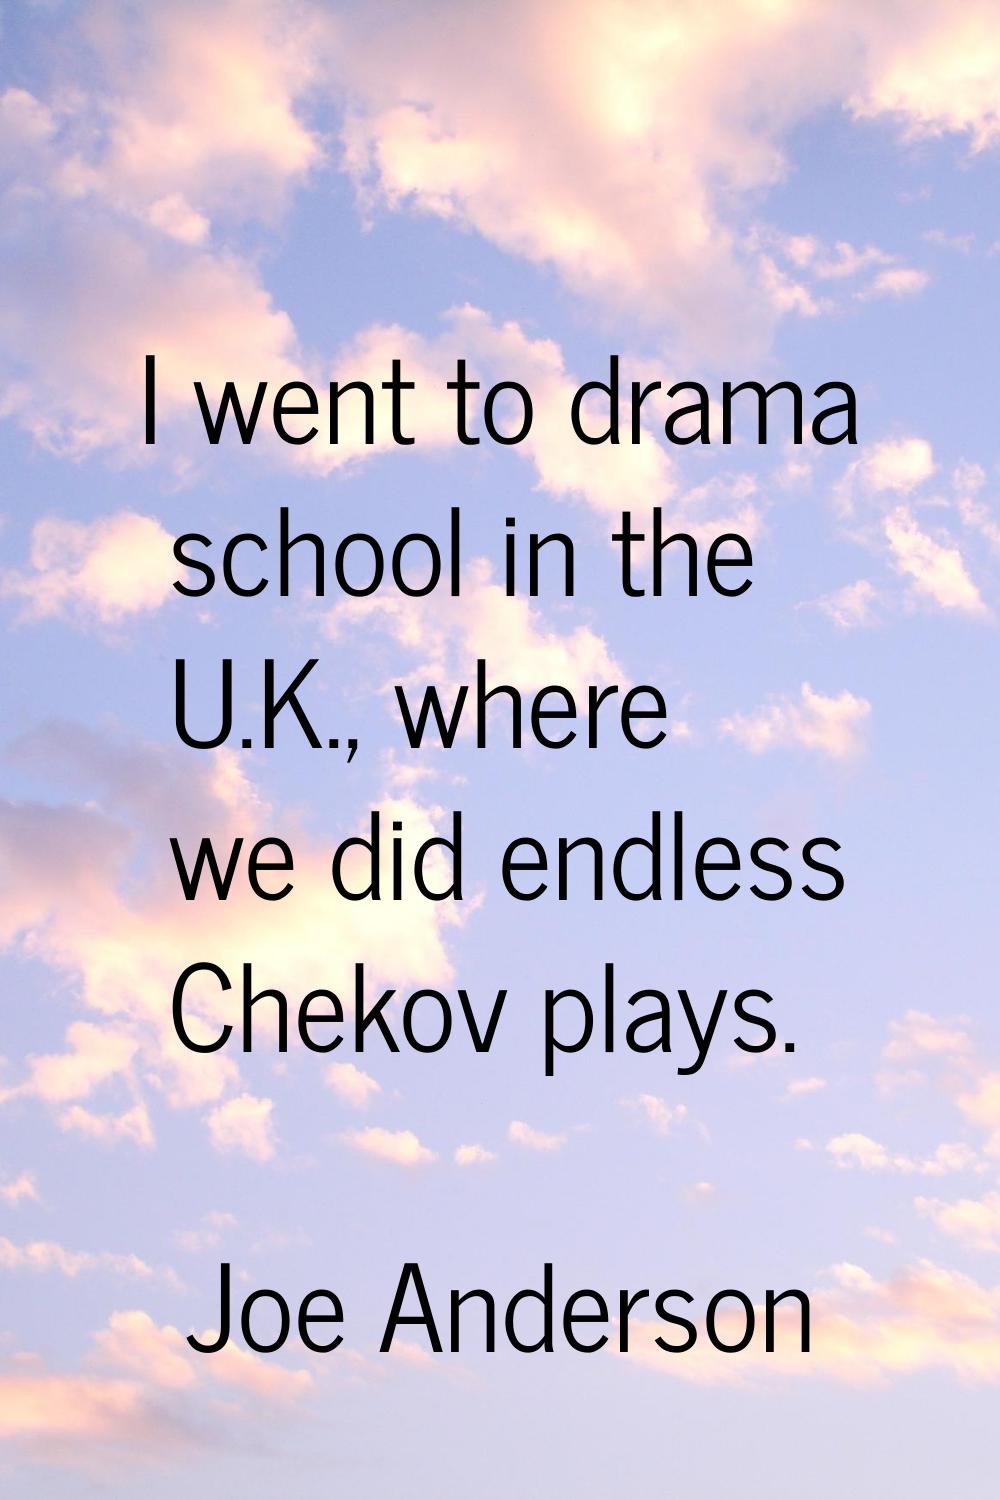 I went to drama school in the U.K., where we did endless Chekov plays.